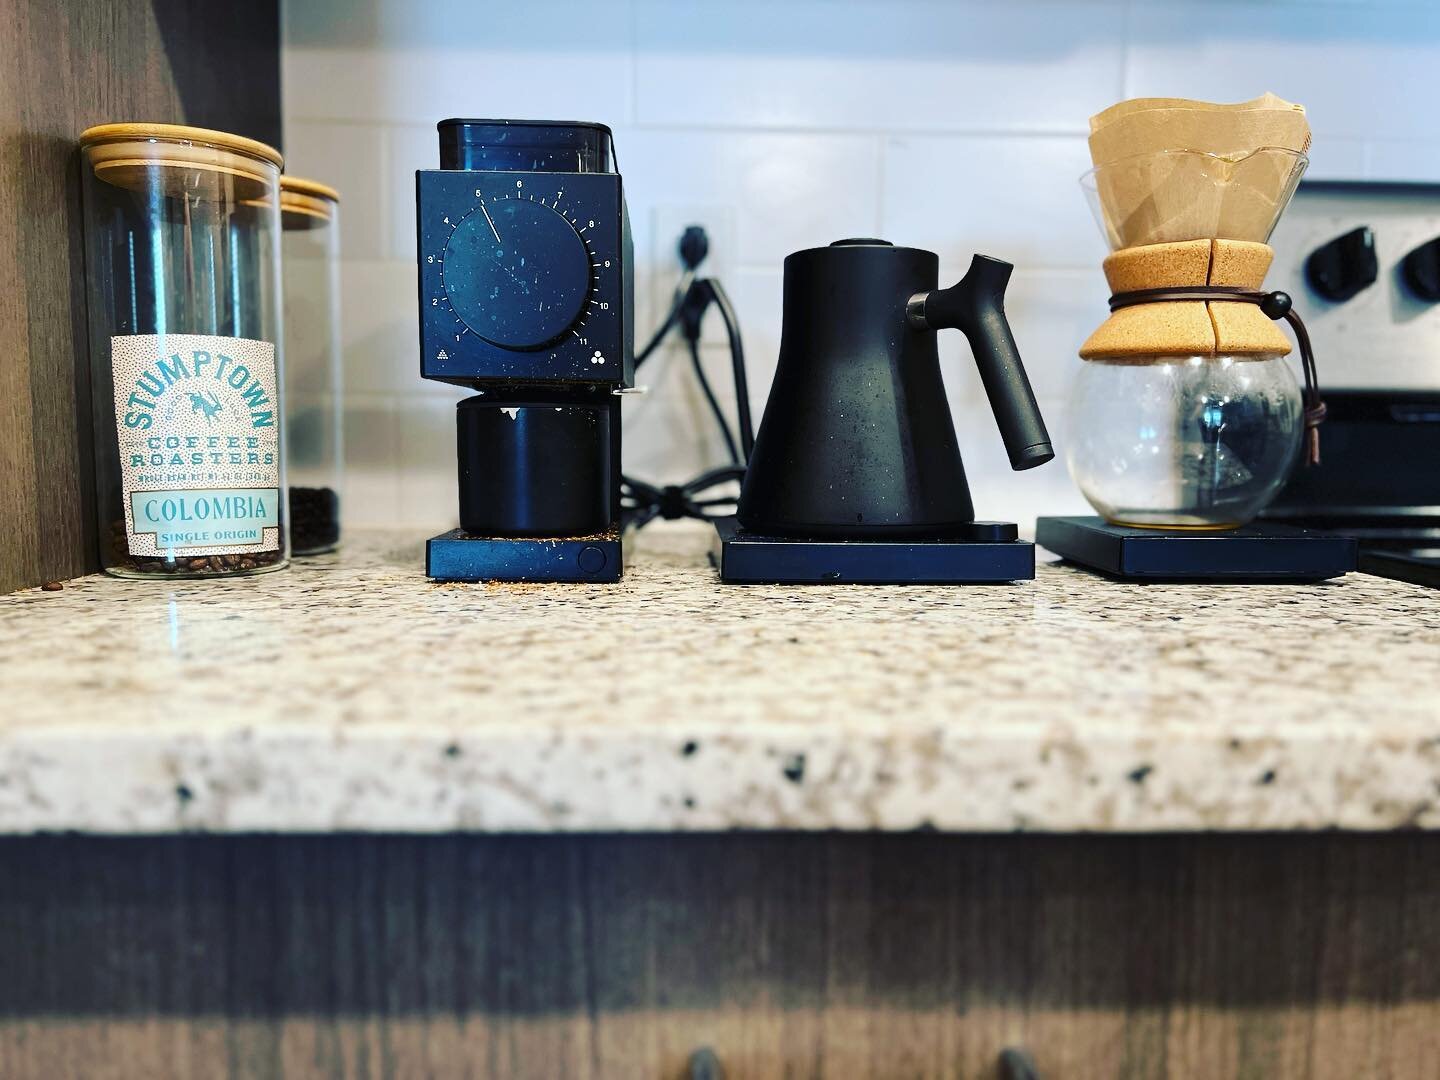 Anybody else obsessed over there home coffee station? Just me? That&rsquo;s fine. Big fan of that @fellowproducts gear 😘🤌🏻☕️